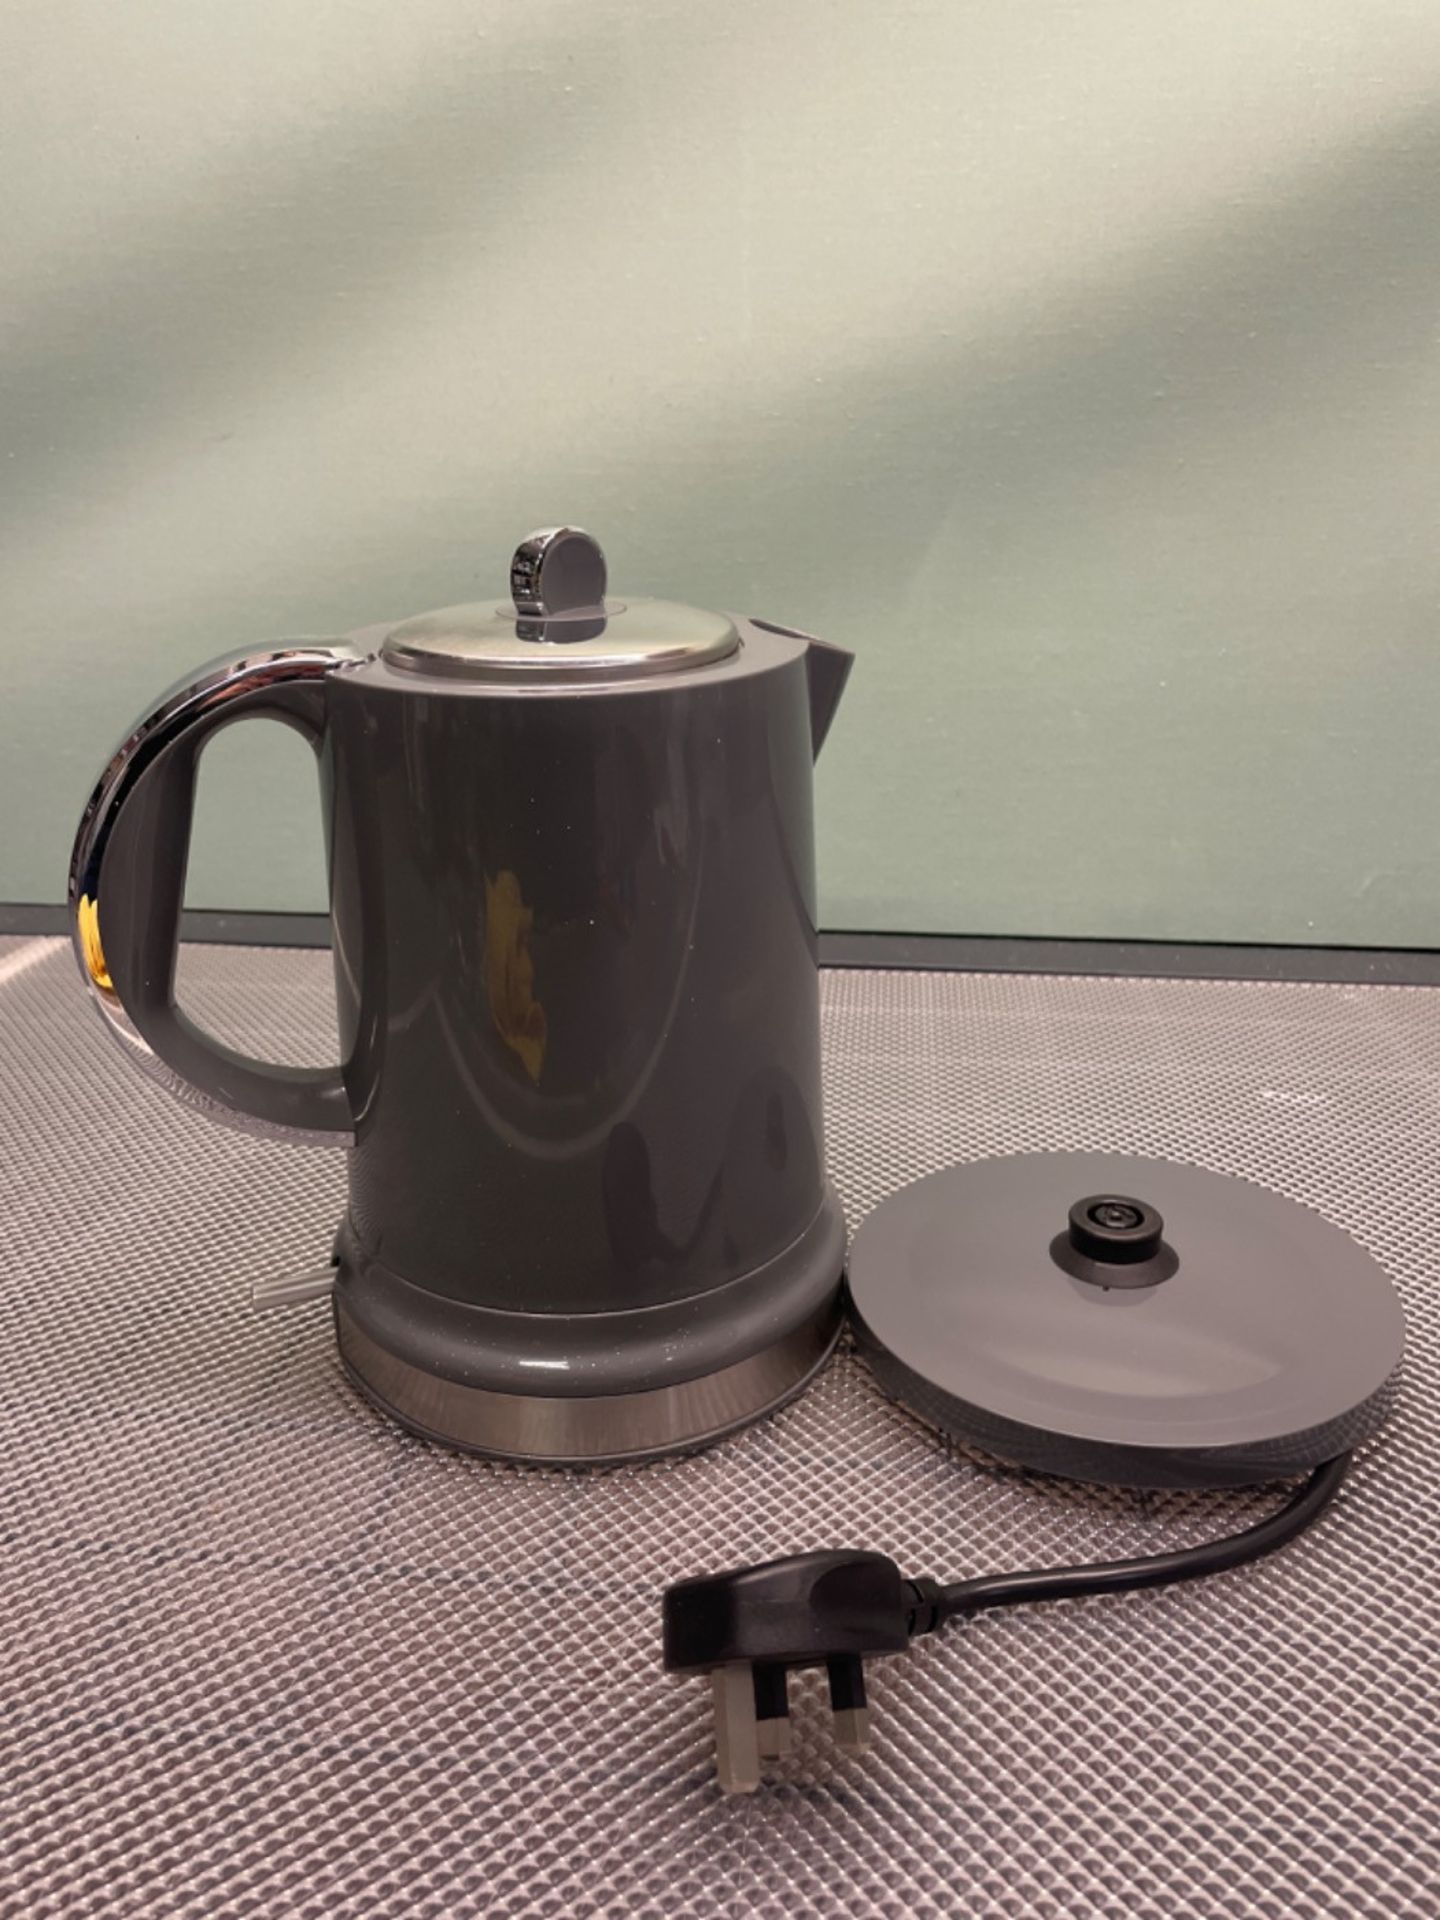 Tower T10049GRP Belle Jug Kettle with Rapid Boil, 1.5 Litre, 3000 W, Graphite - Image 2 of 3